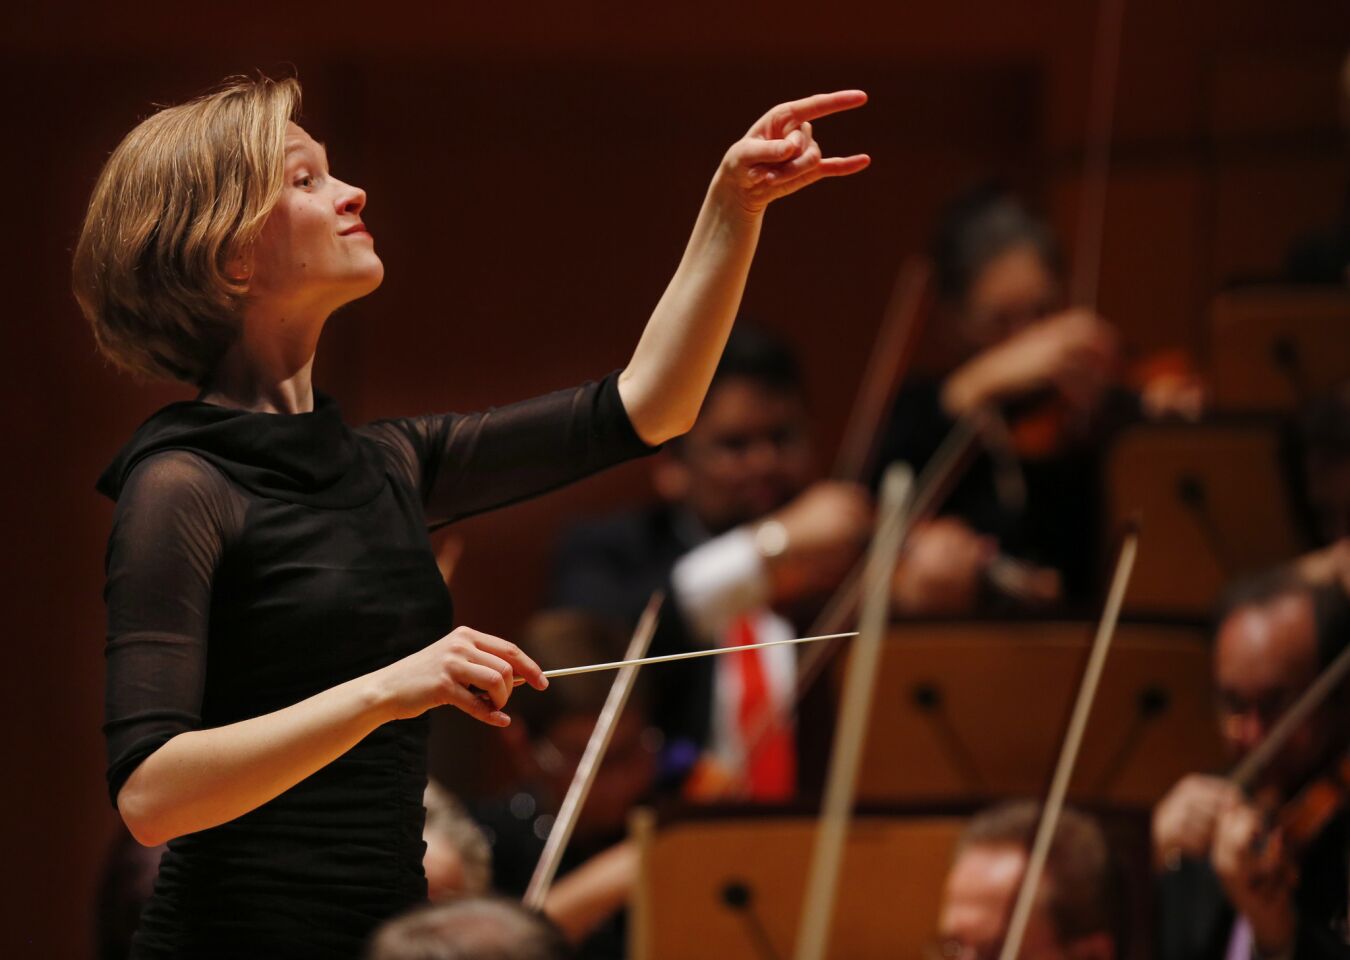 Los Angeles Philharmonic assistant conductor Mirga Grazinyte-Tyla leads the orchestra in her first L.A. Phil subscription concert at Walt Disney Concert Hall on March 1 in a program of Mozart, Beethoven and Stravinsky.